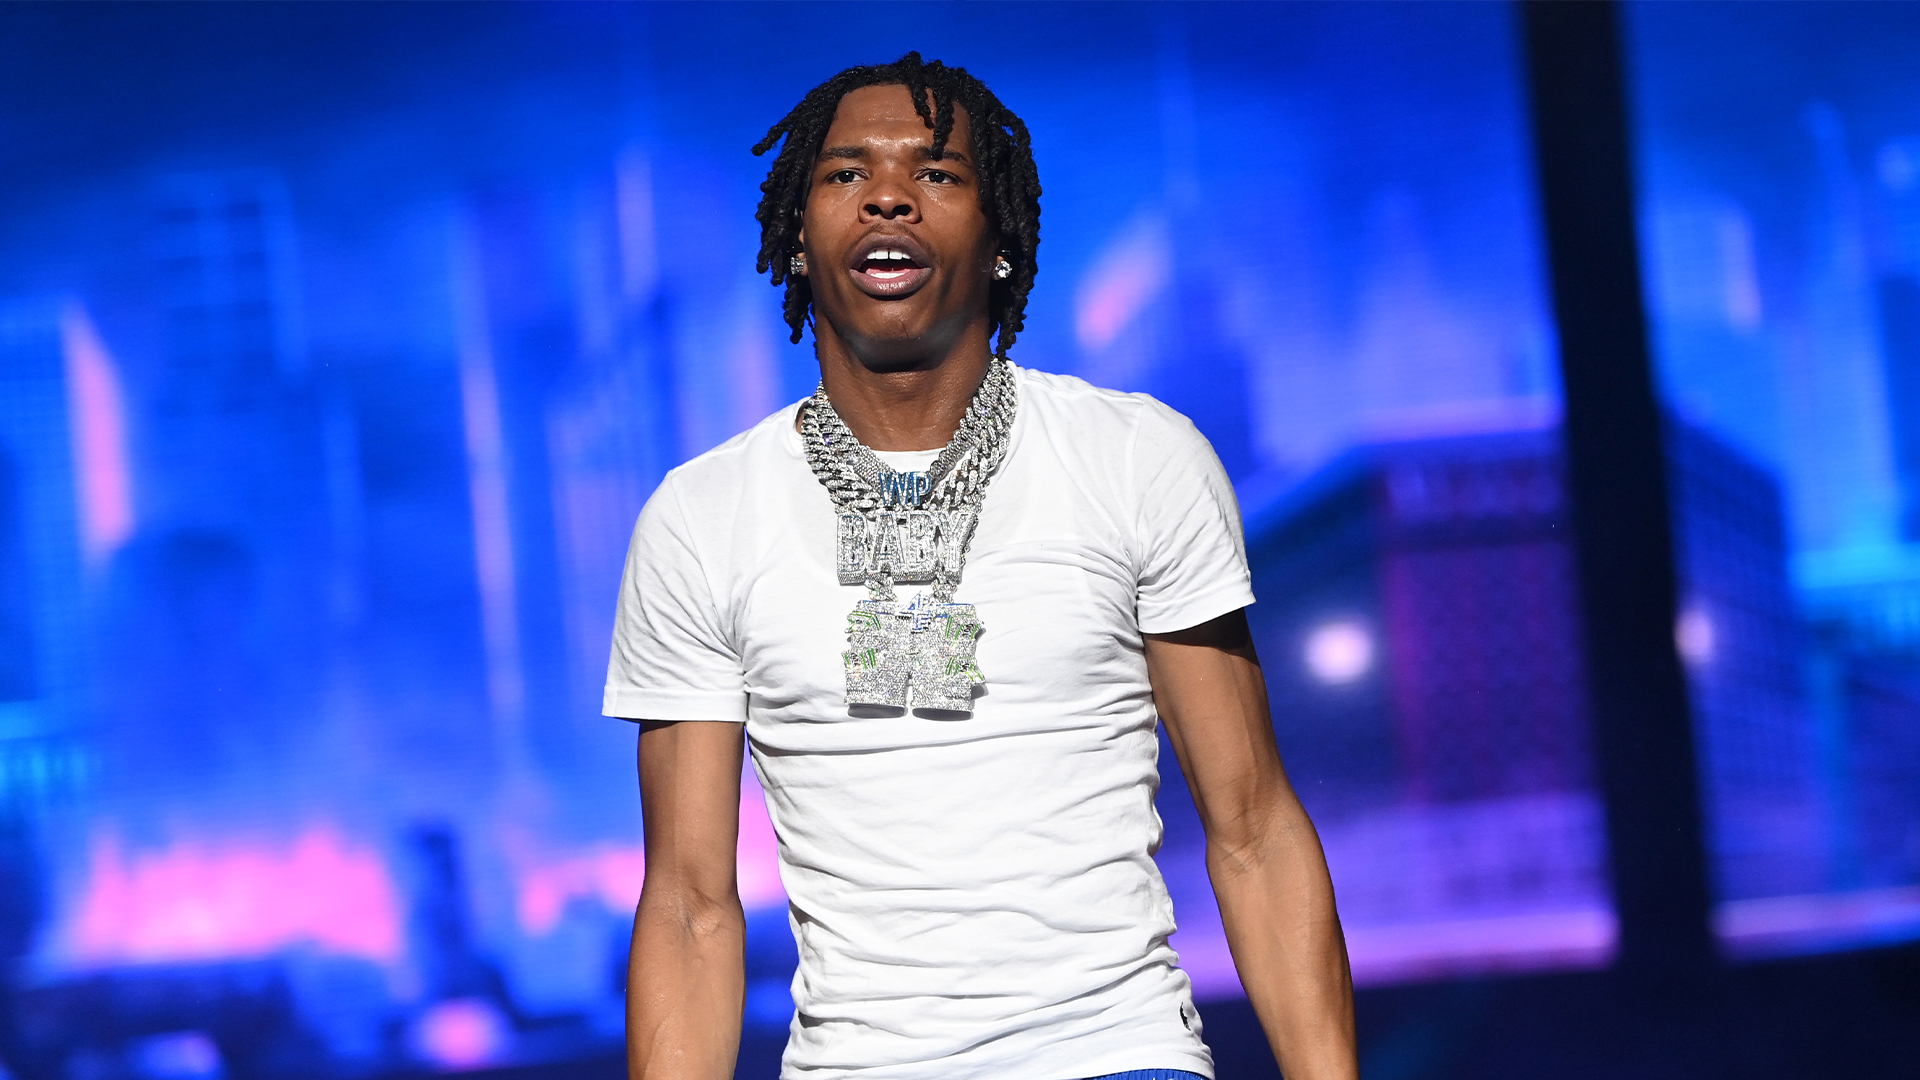 Lil Baby Joins Entrepreneur Lemont Bradley In An Effort To Give 100 Jobs To Teens And Young Adults In His Hometown Of Atlanta